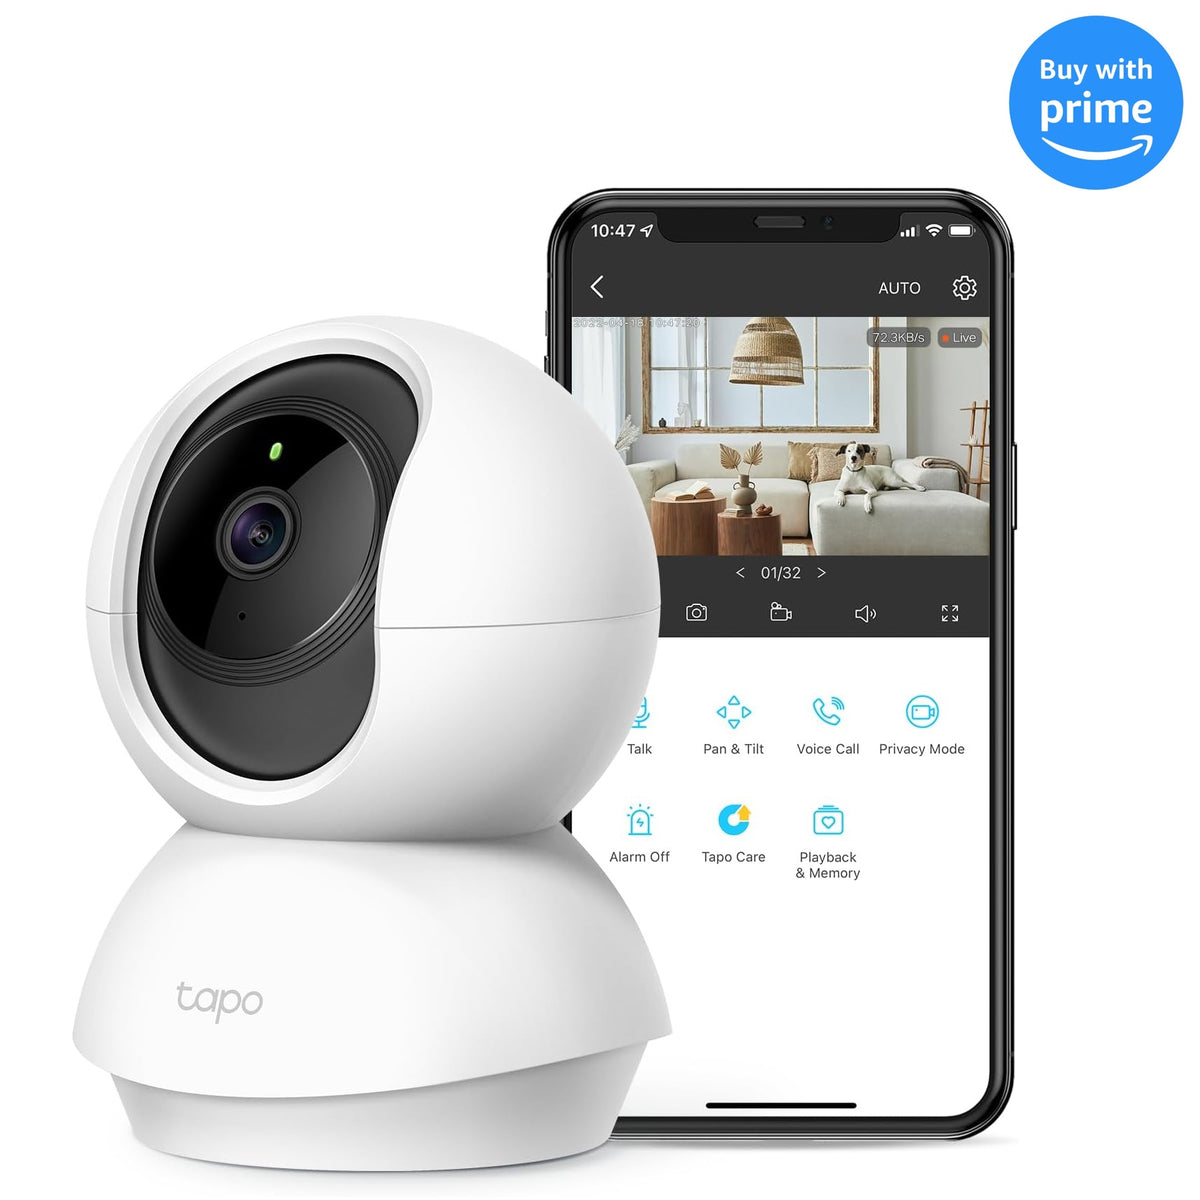 TP Link Tapo C500 Outdoor Pan/Tilt Security WiFi Camera at Rs 3500